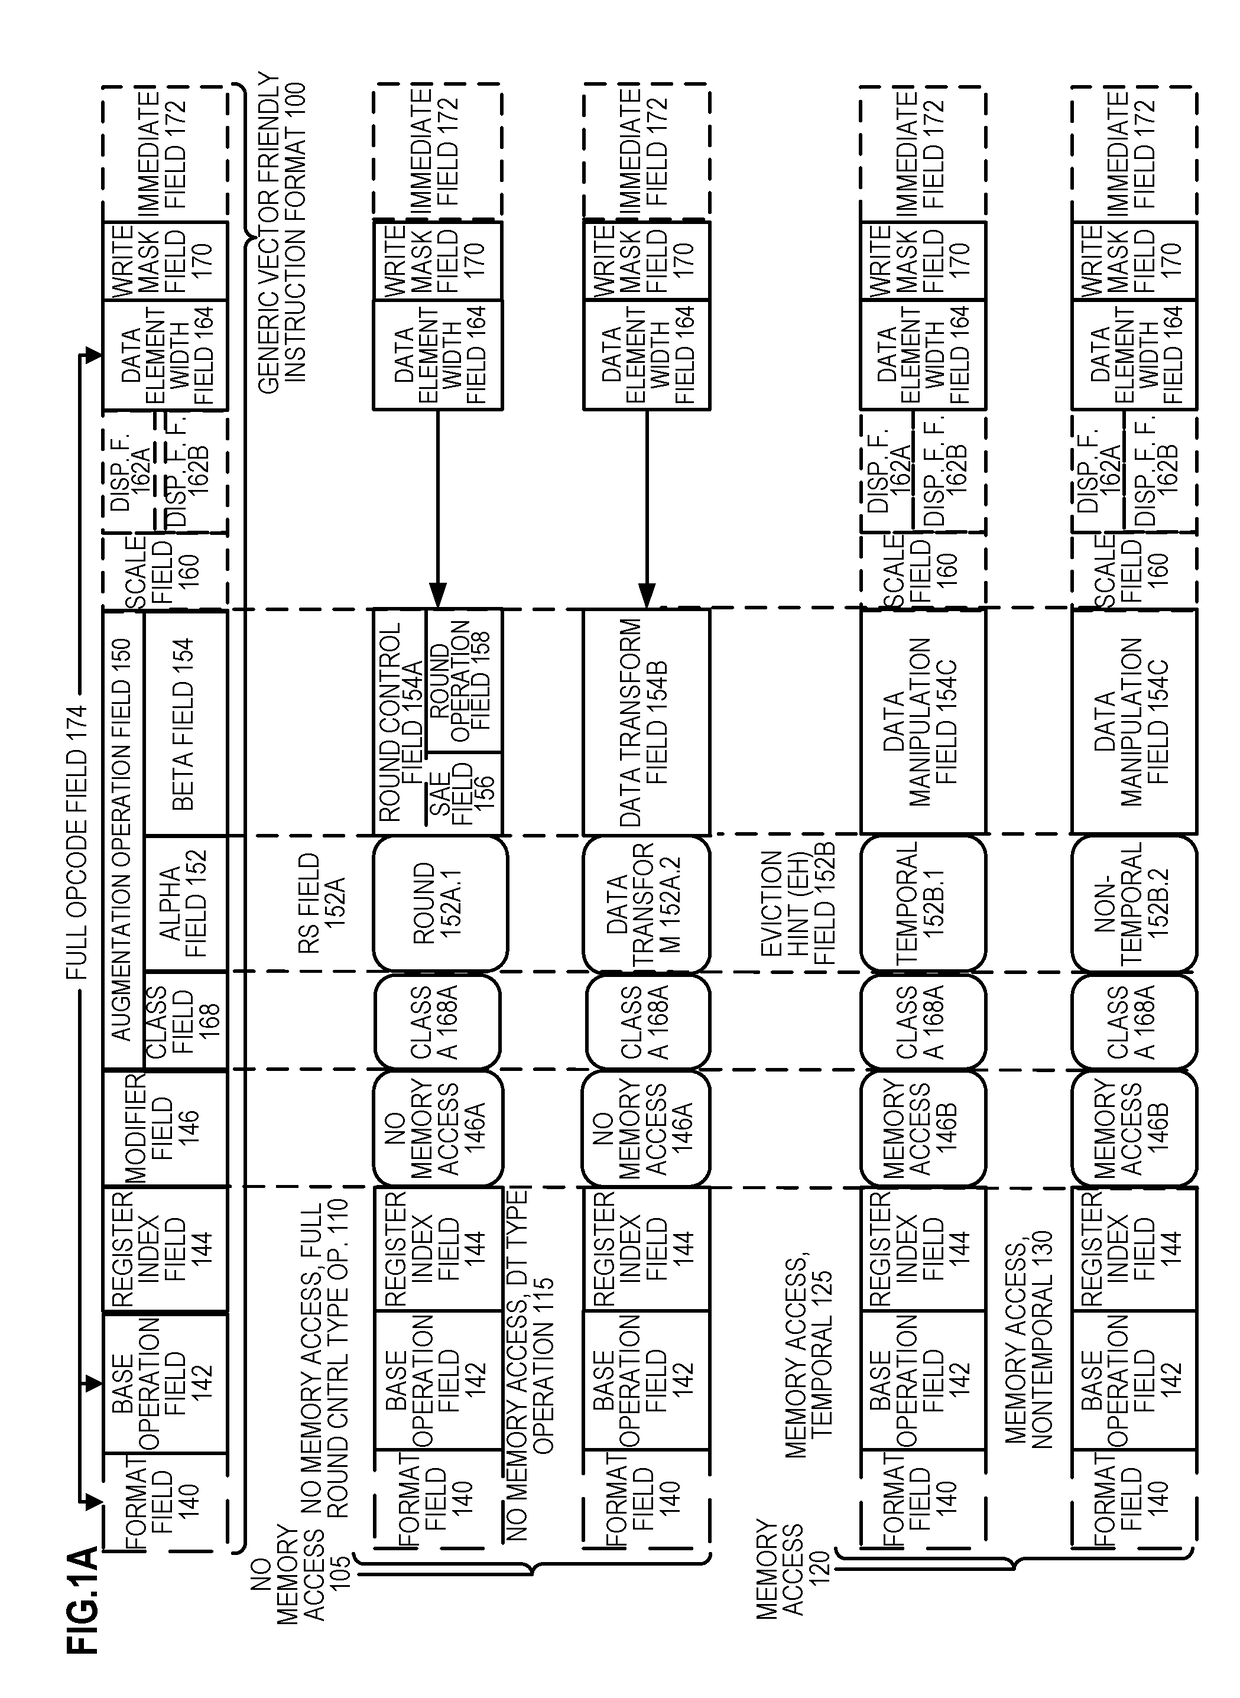 Apparatus and method for accelerating graph analytics